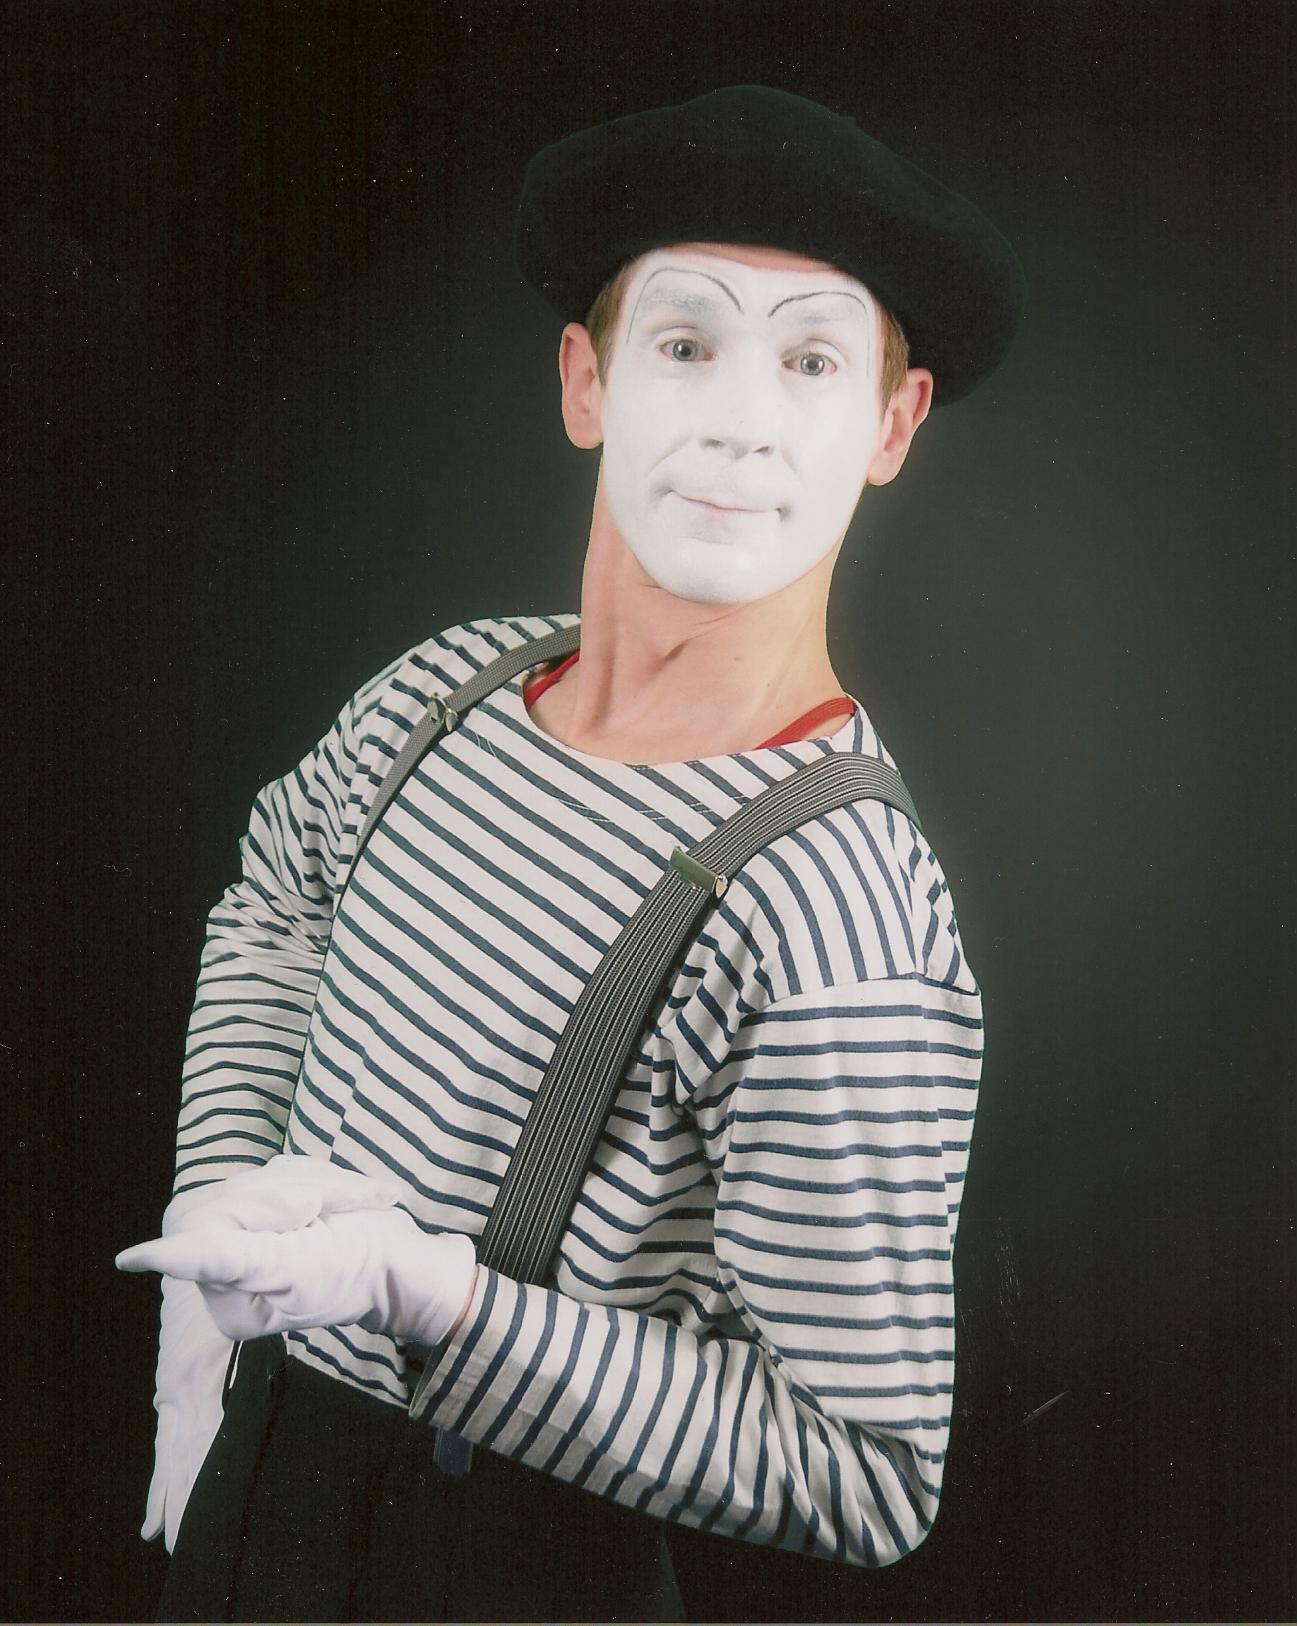 Mime Show